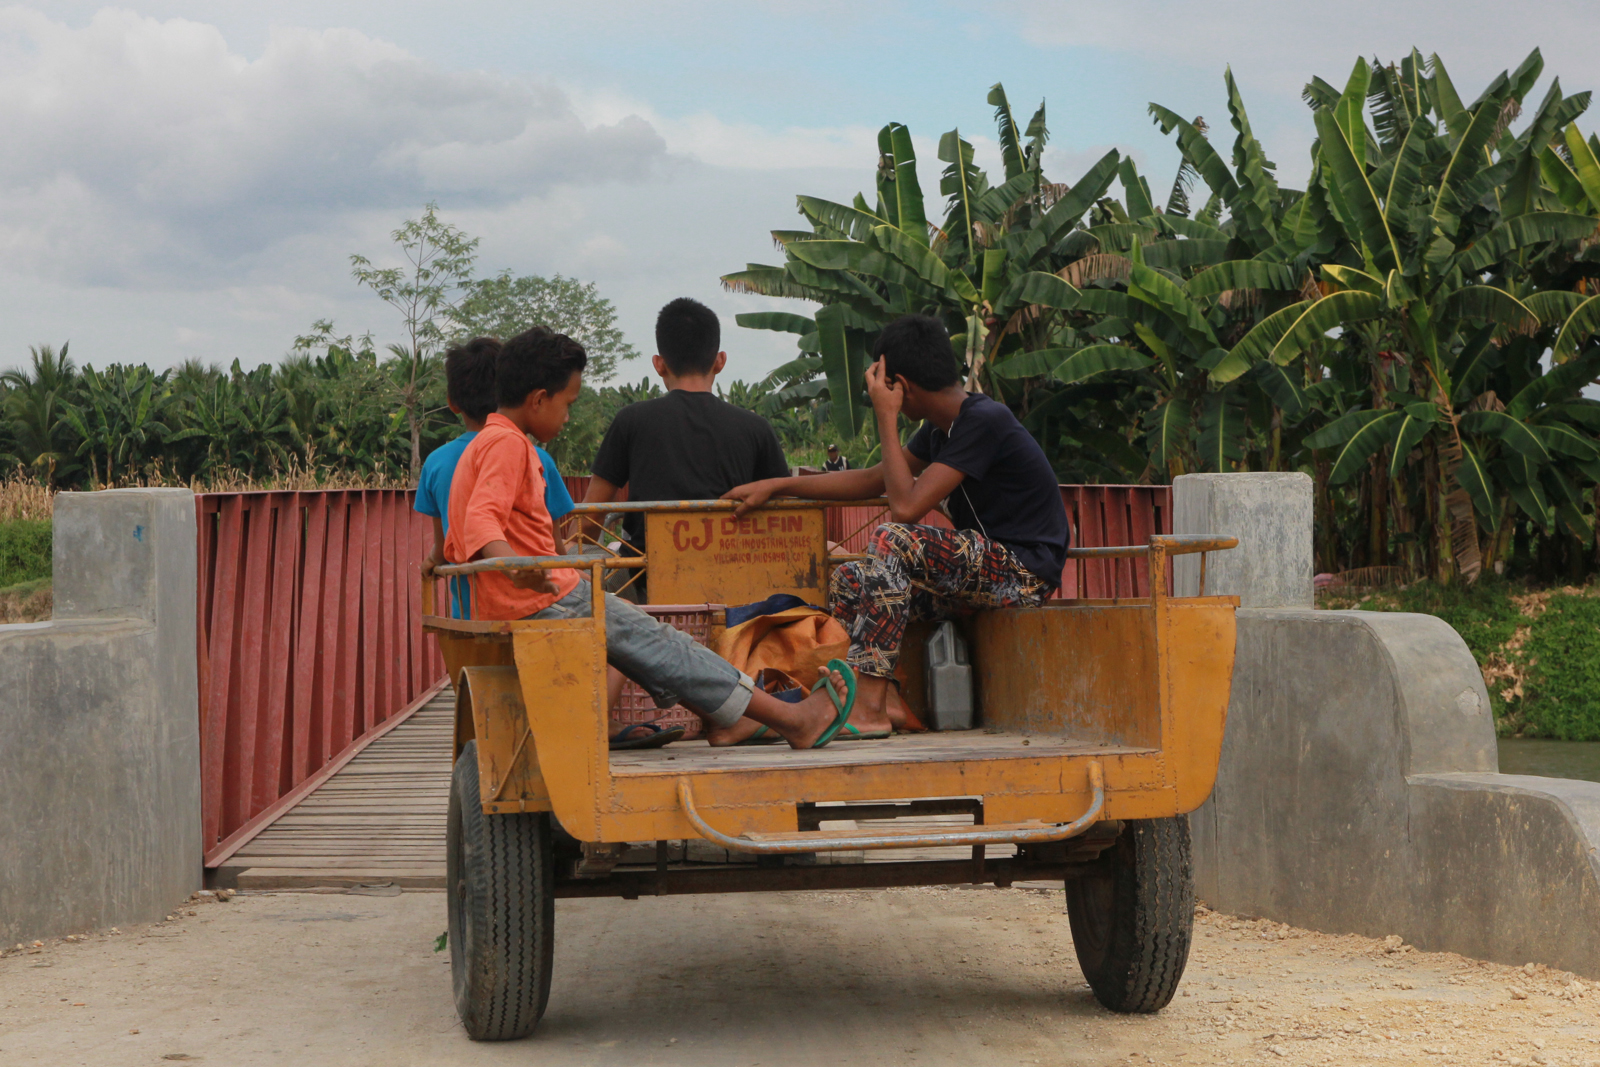 Zaharimin Amilil and his friends ride a hand tractor as they cross a newly-constructed bridge in Barangay Tukanalipao, Mamasapano, Maguindanao on January 19, 2016. They are going to harvest their crops that were attacked by rats in the same area where alll but one of 36 members of the 55th Special Action Company of hte Special Action Force (SAF) were killed on January 25, 2016. Eight other SAF members were killed along wiht 17 members of the MILF's Bangsamoro Islamic Armed Forces and five civilians. MindaNews photo by Toto Lozano 